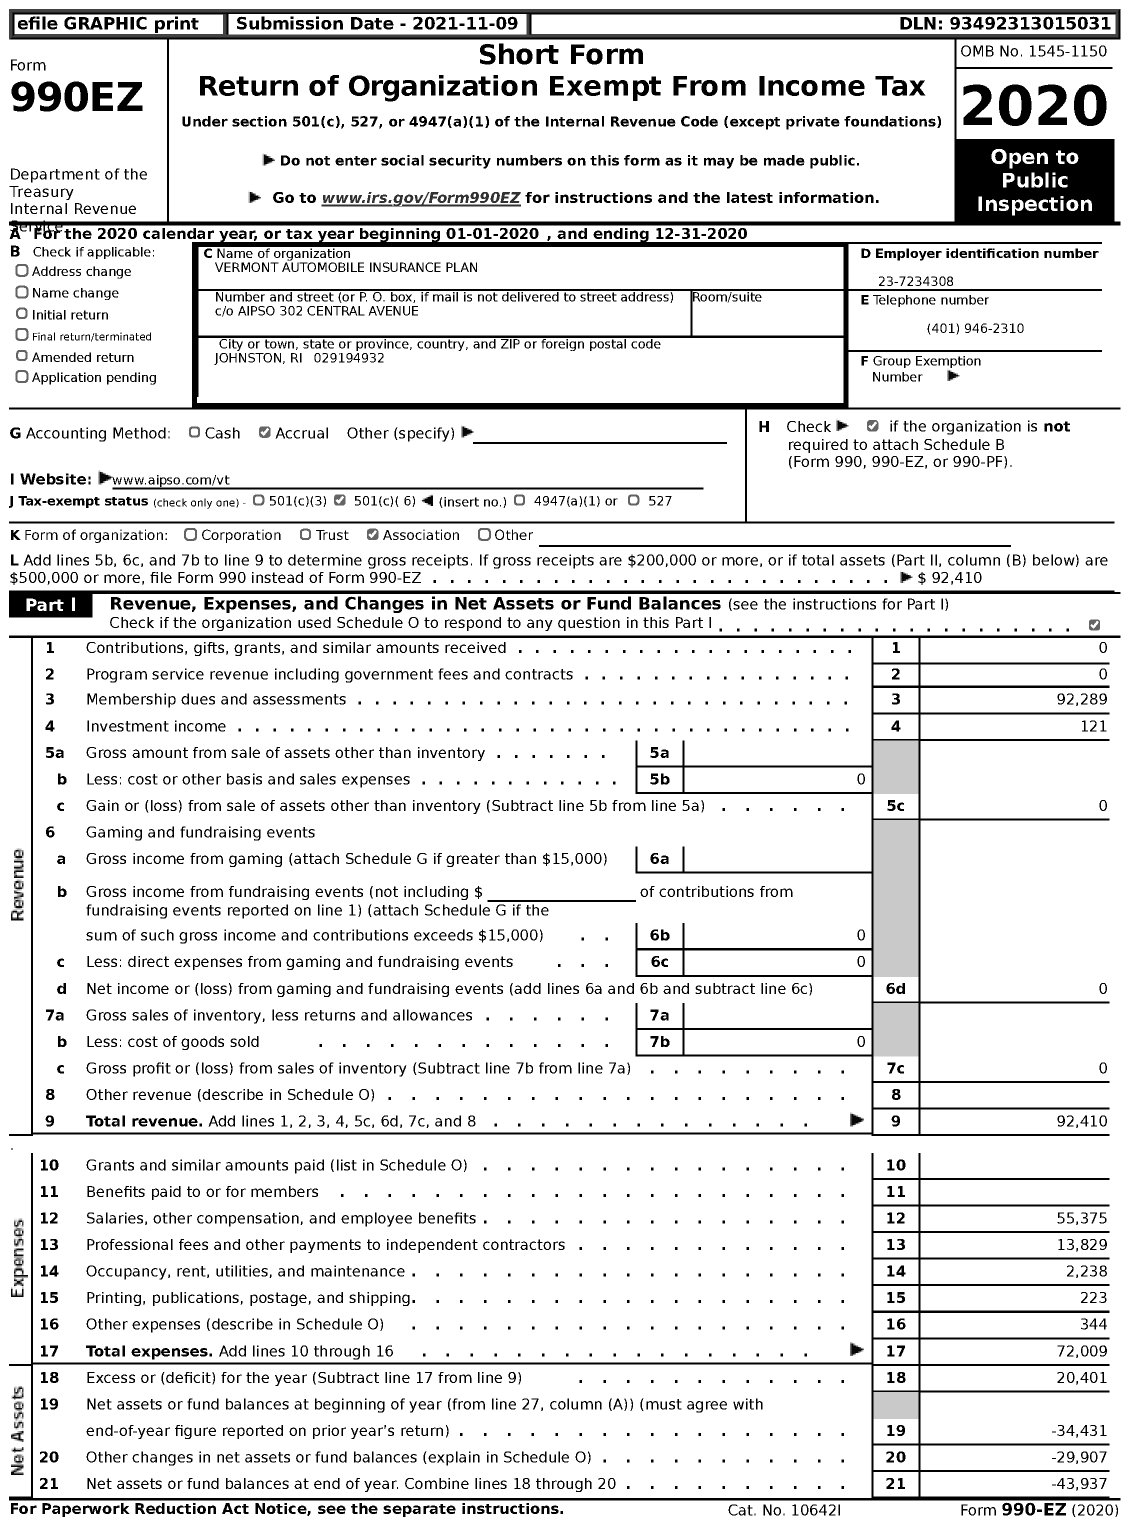 Image of first page of 2020 Form 990EZ for Vermont Automobile Insurance Plan